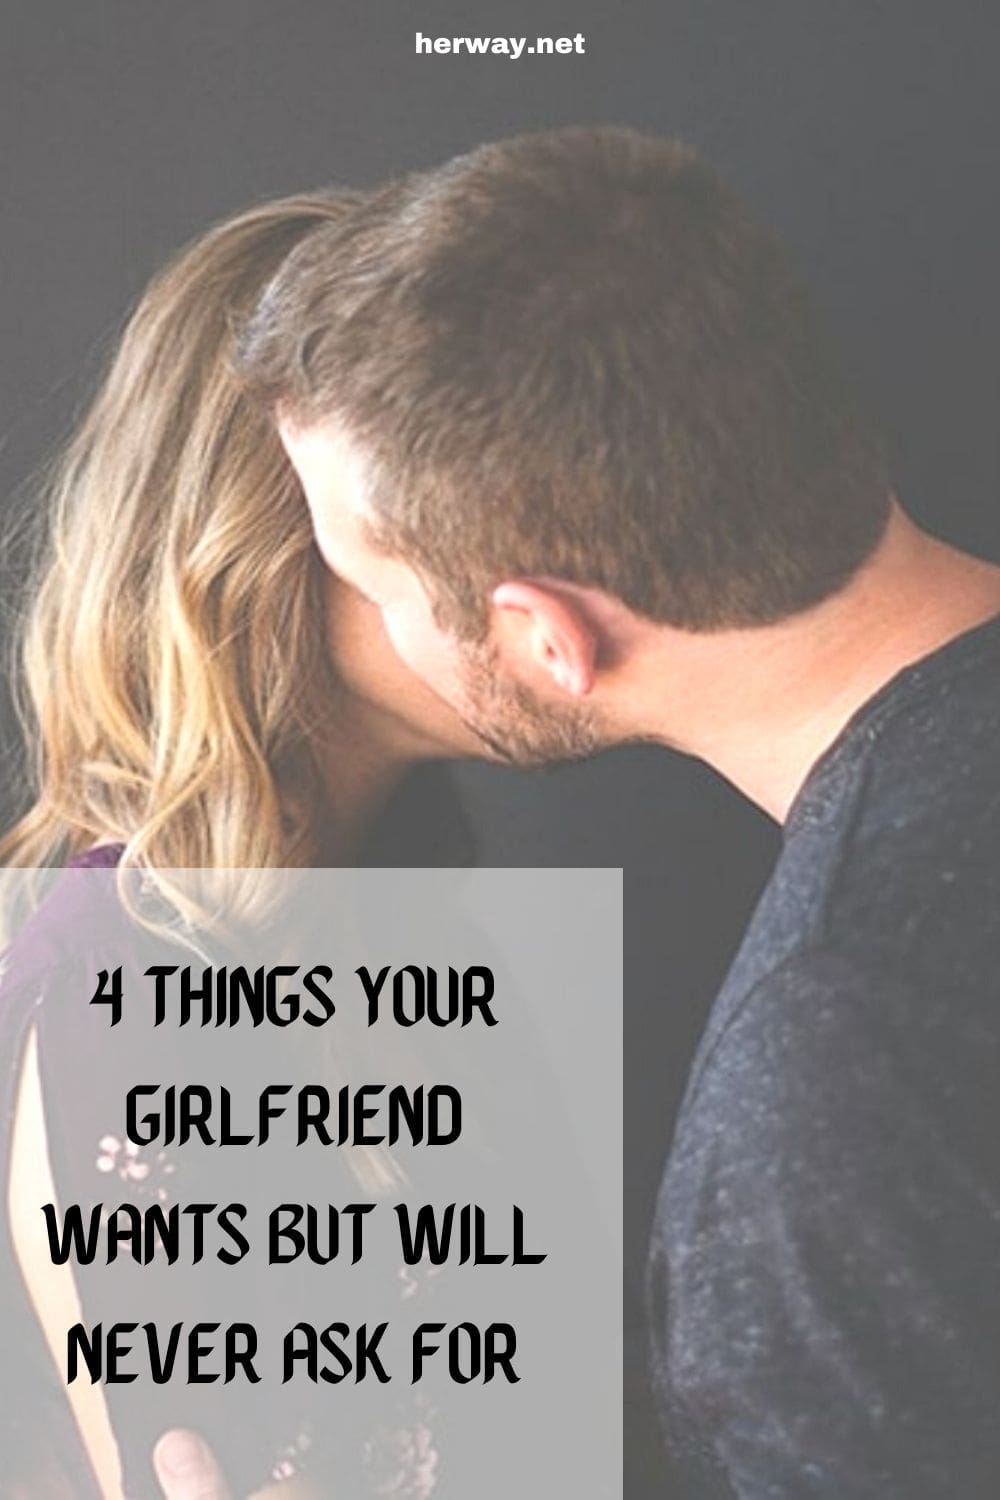 4 Things Your Girlfriend Wants But Will Never Ask For